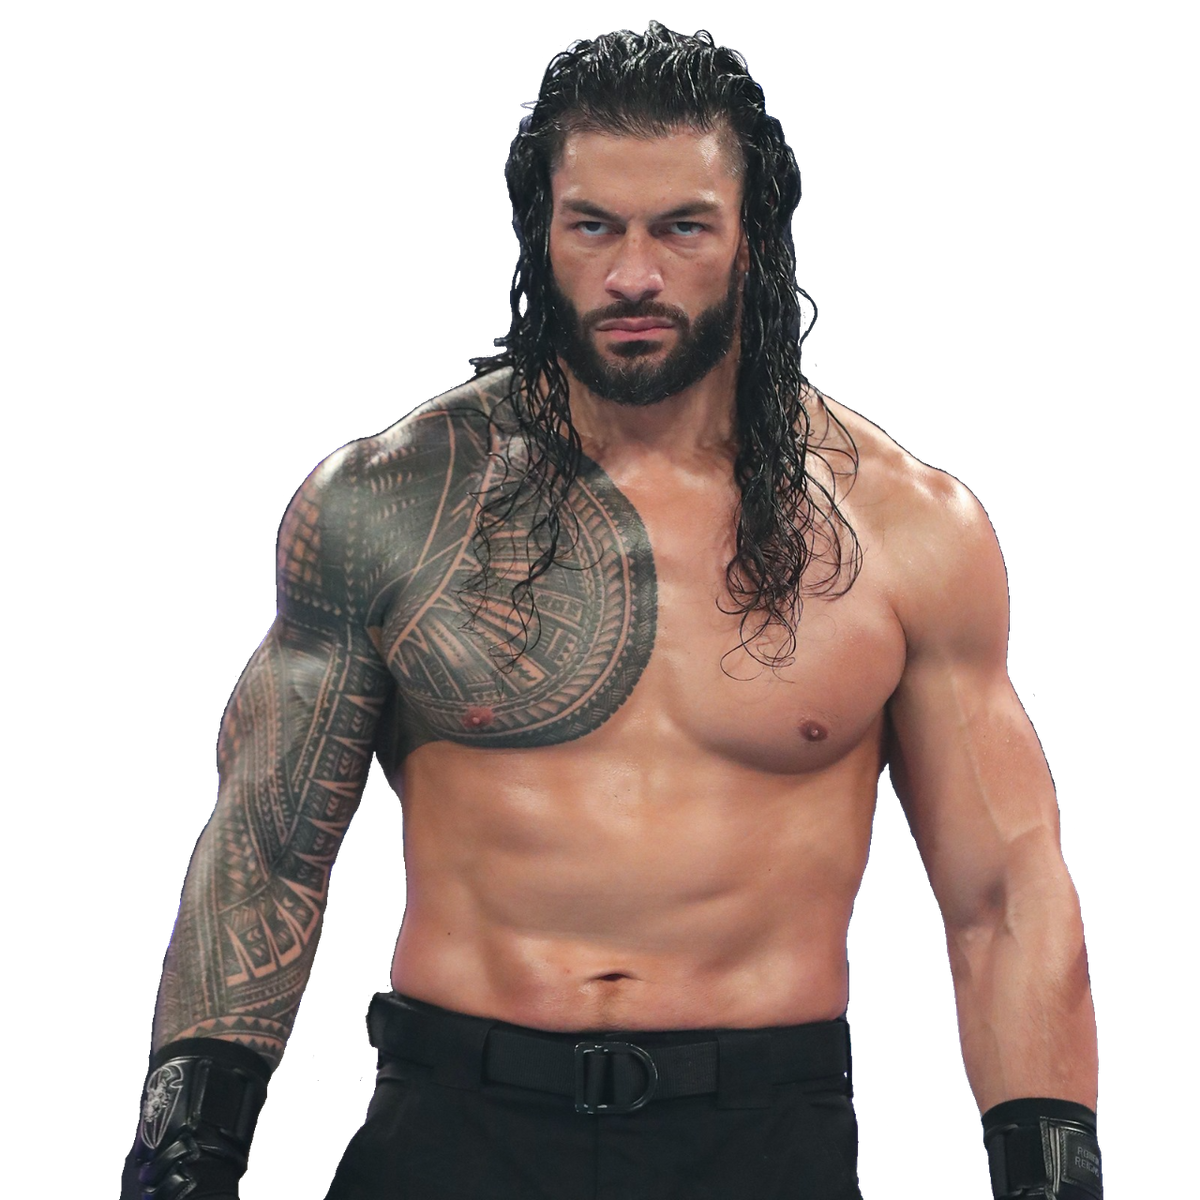 https://static.wikia.nocookie.net/prowrestling/images/f/f7/Roman_Reigns_Tribal_Chief.png/revision/latest/scale-to-width-down/1200?cb=20210524105359